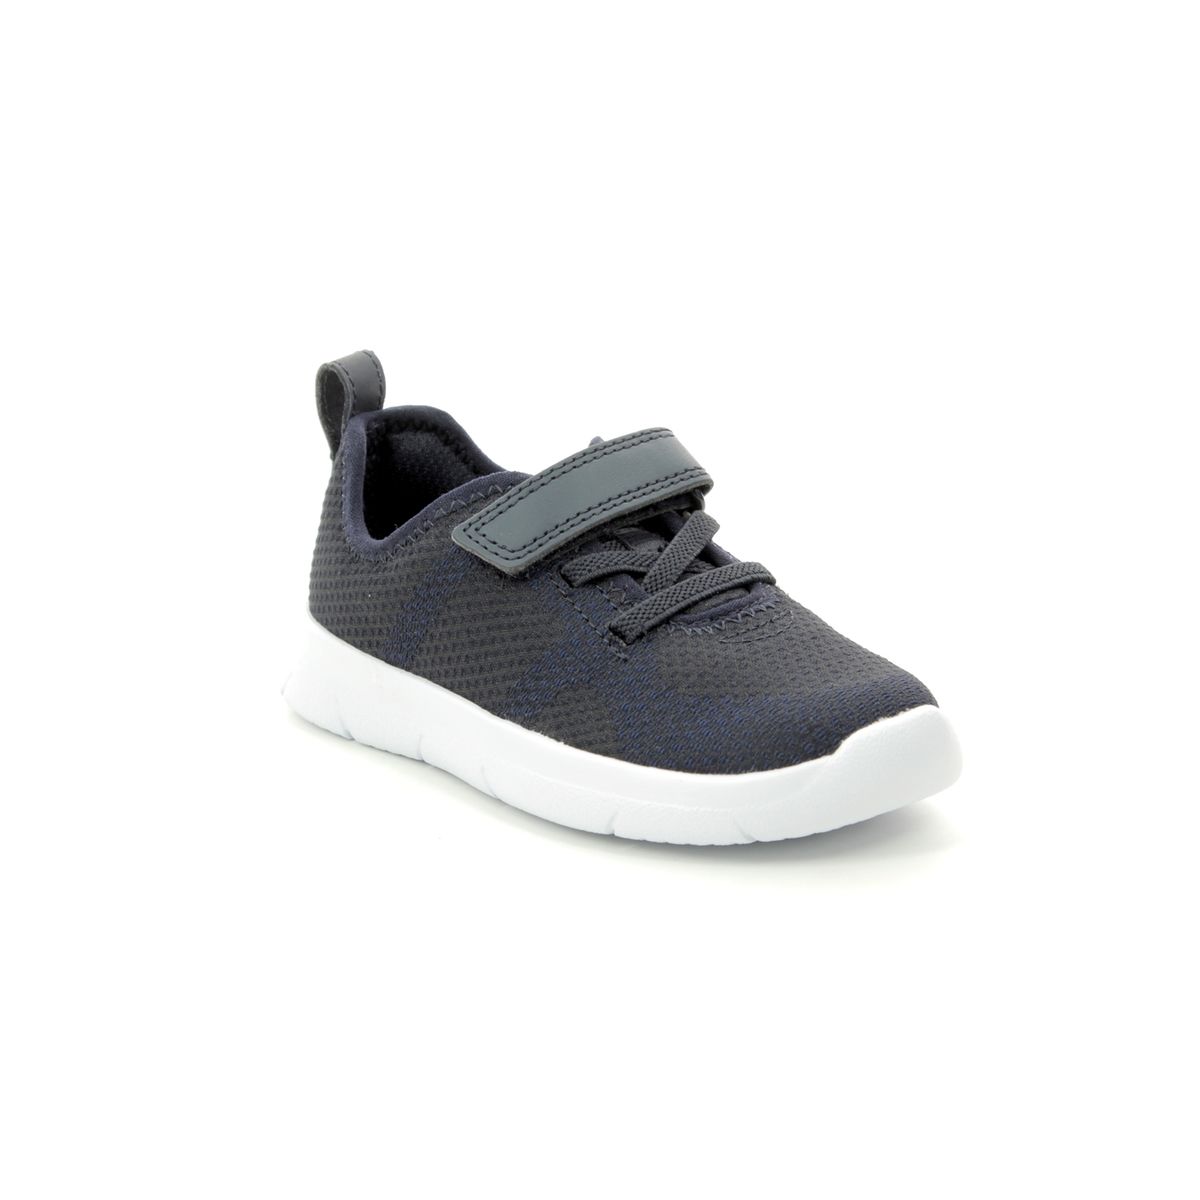 Clarks Ath Flux T Navy Kids Toddler Boys Trainers 412697G In Size 7.5 In Plain Navy G Width Fitting For kids